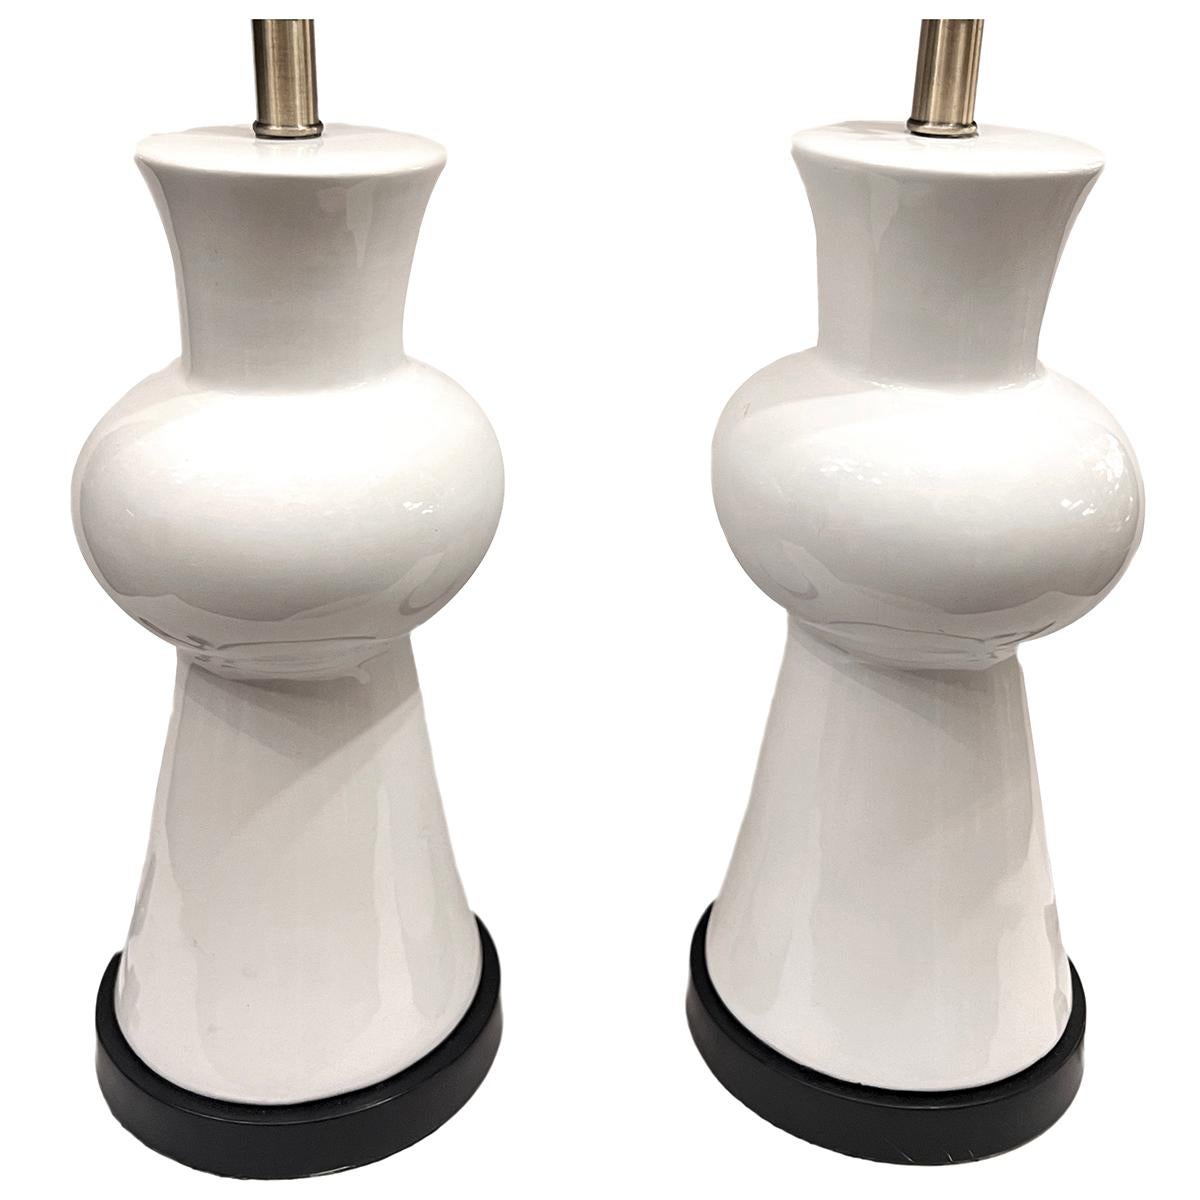 Pair of circa 1960's Italian porcelain lamps with wood bases.

Measurements:
Height of body: 16